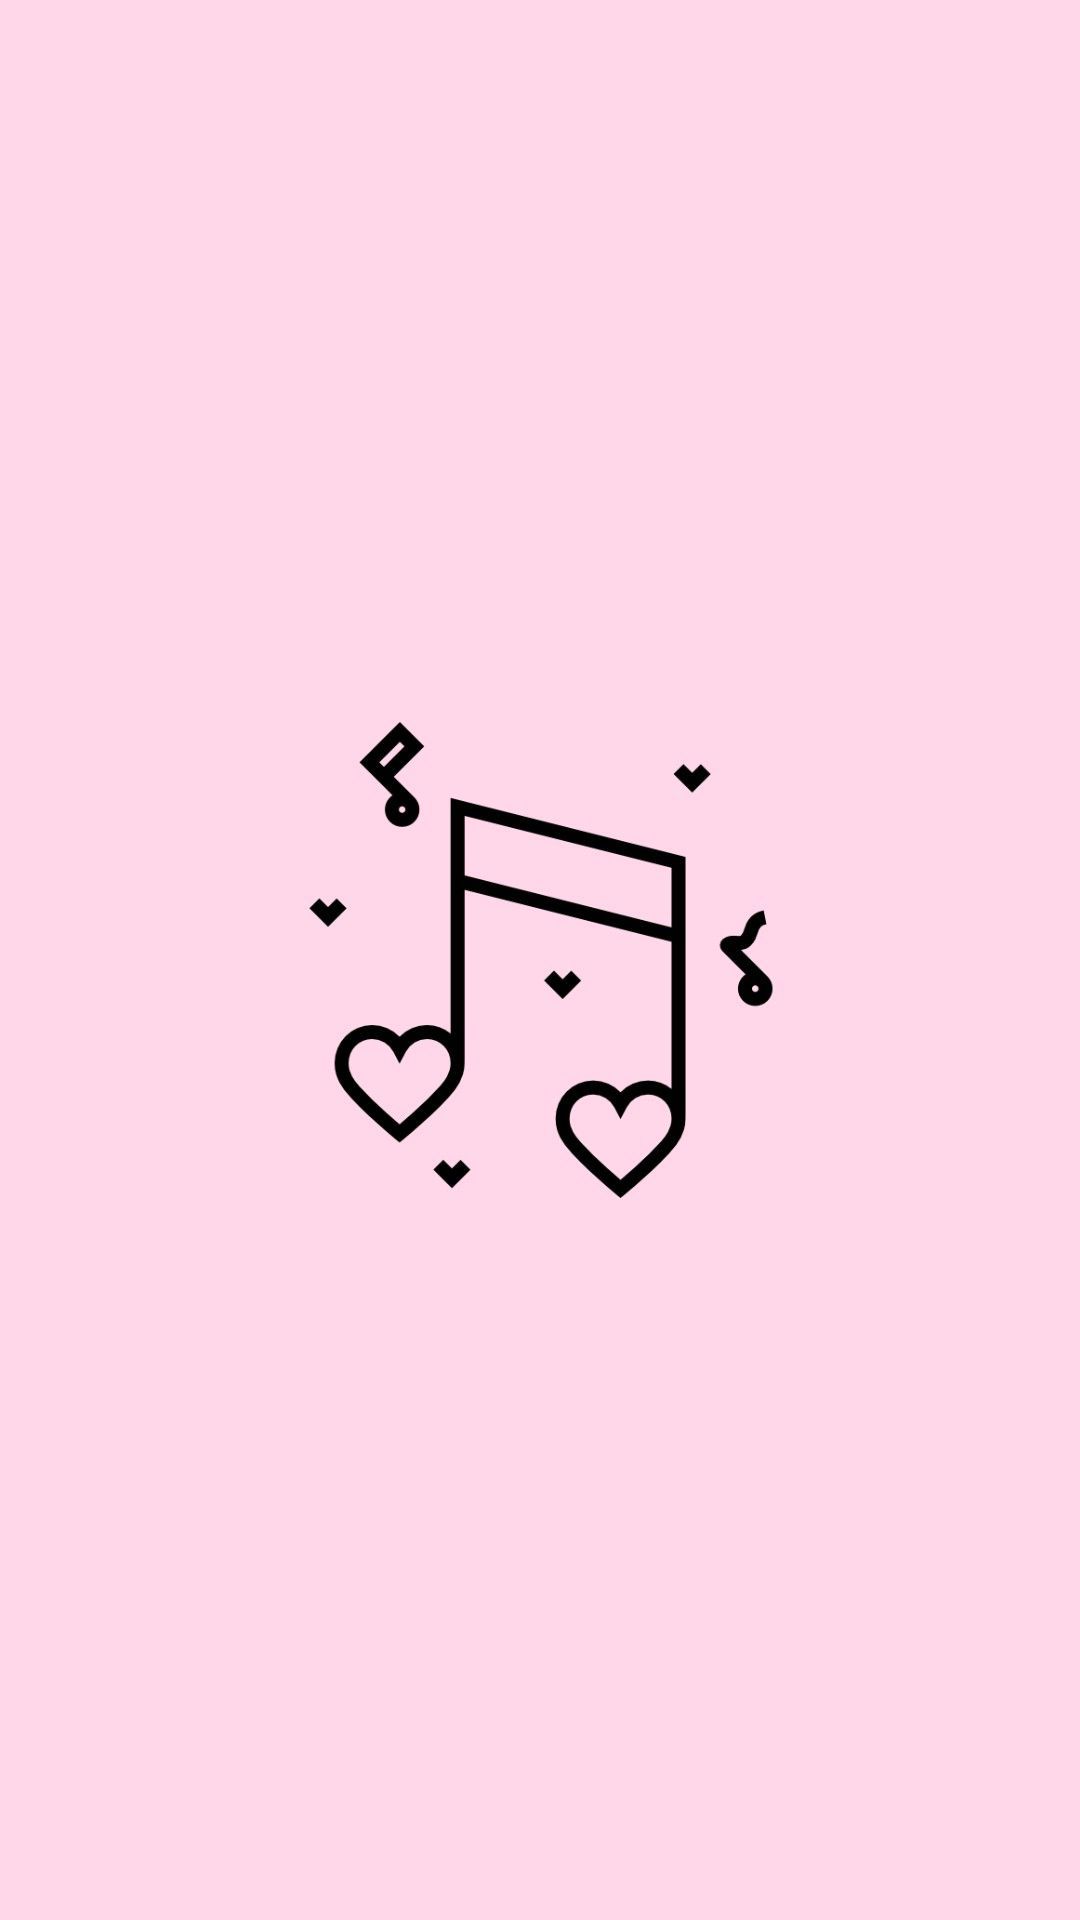 Music note with hearts on a pink background - Music